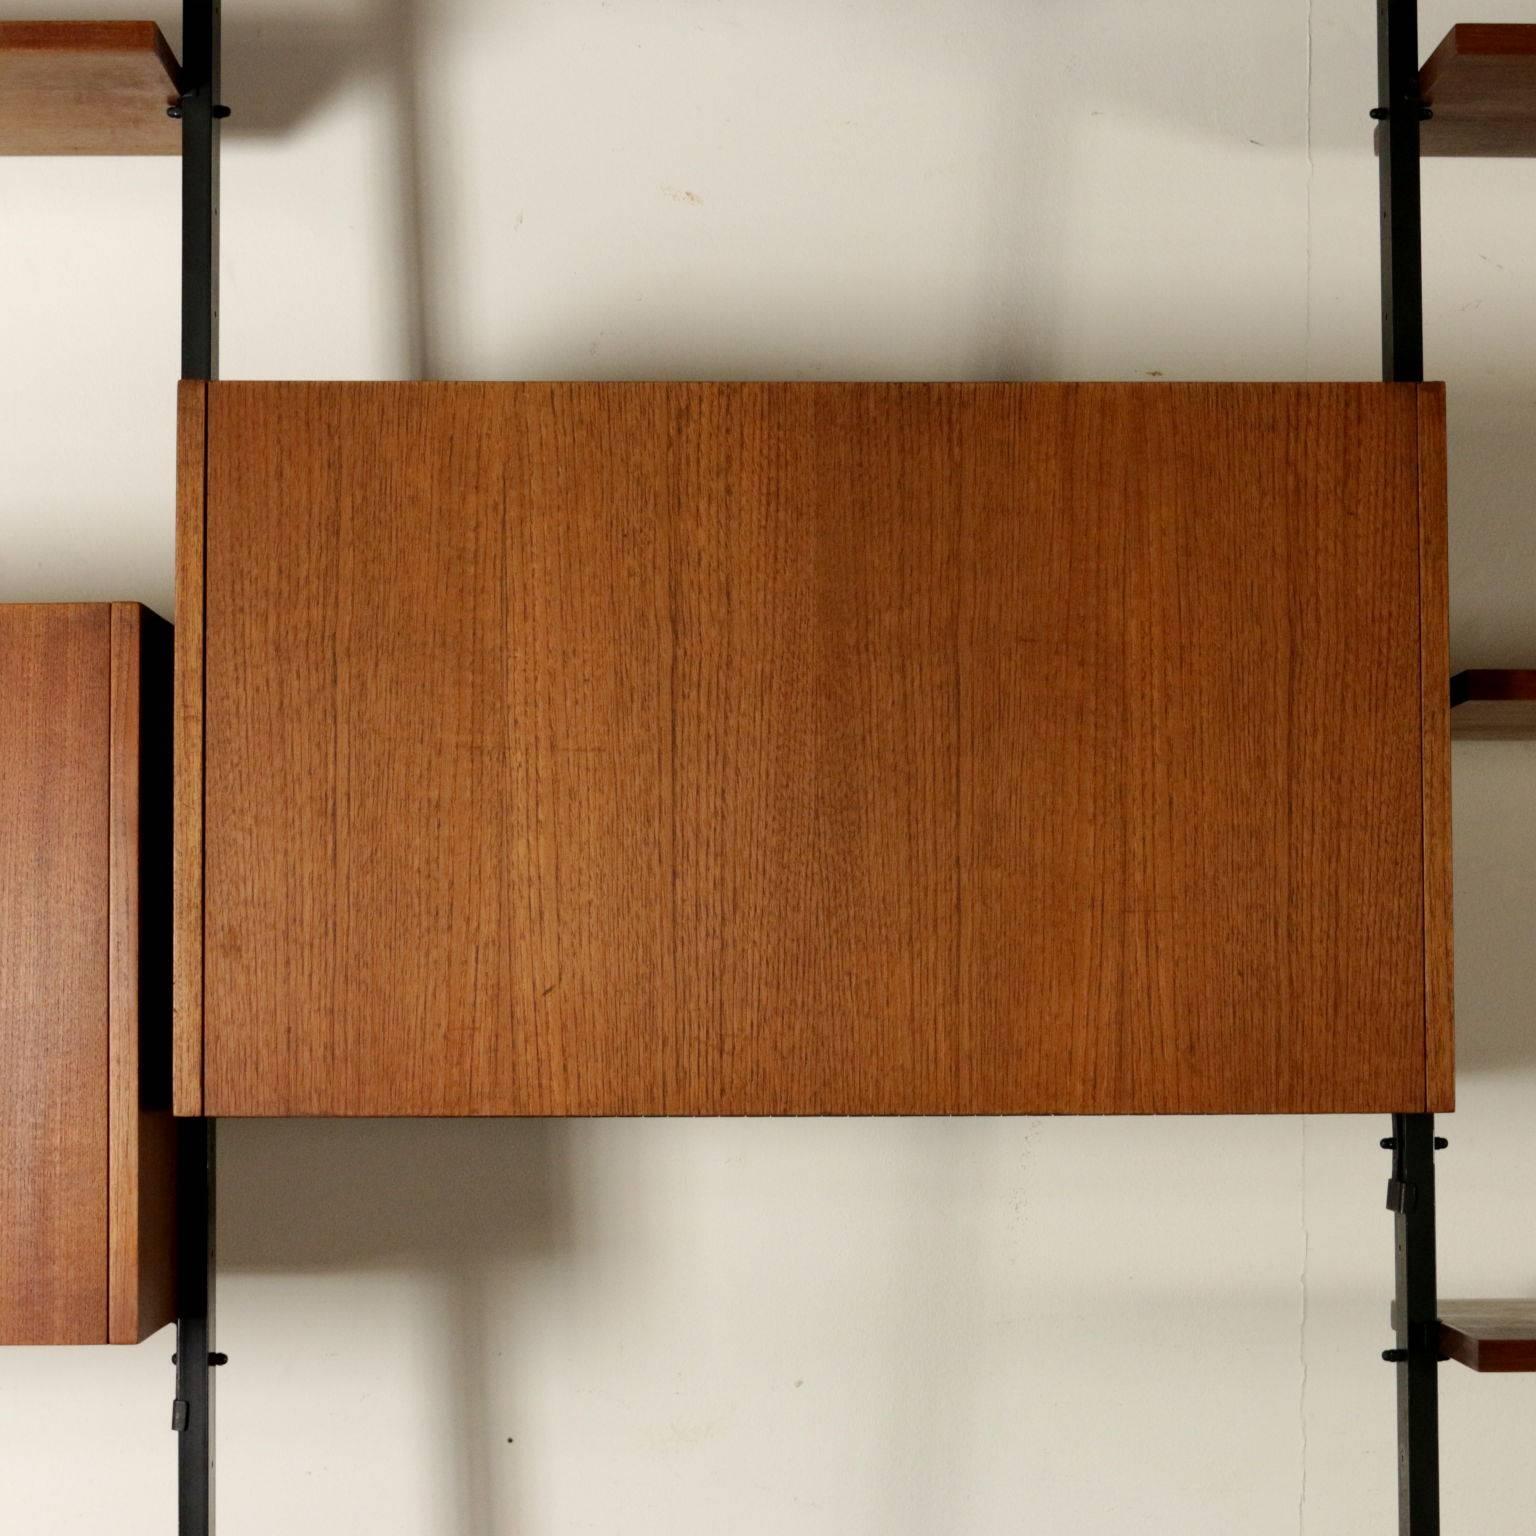 Bookcase Designed by Paolo Tilche Teak Veneer Vintage, Italy, 1950s-1960s 1